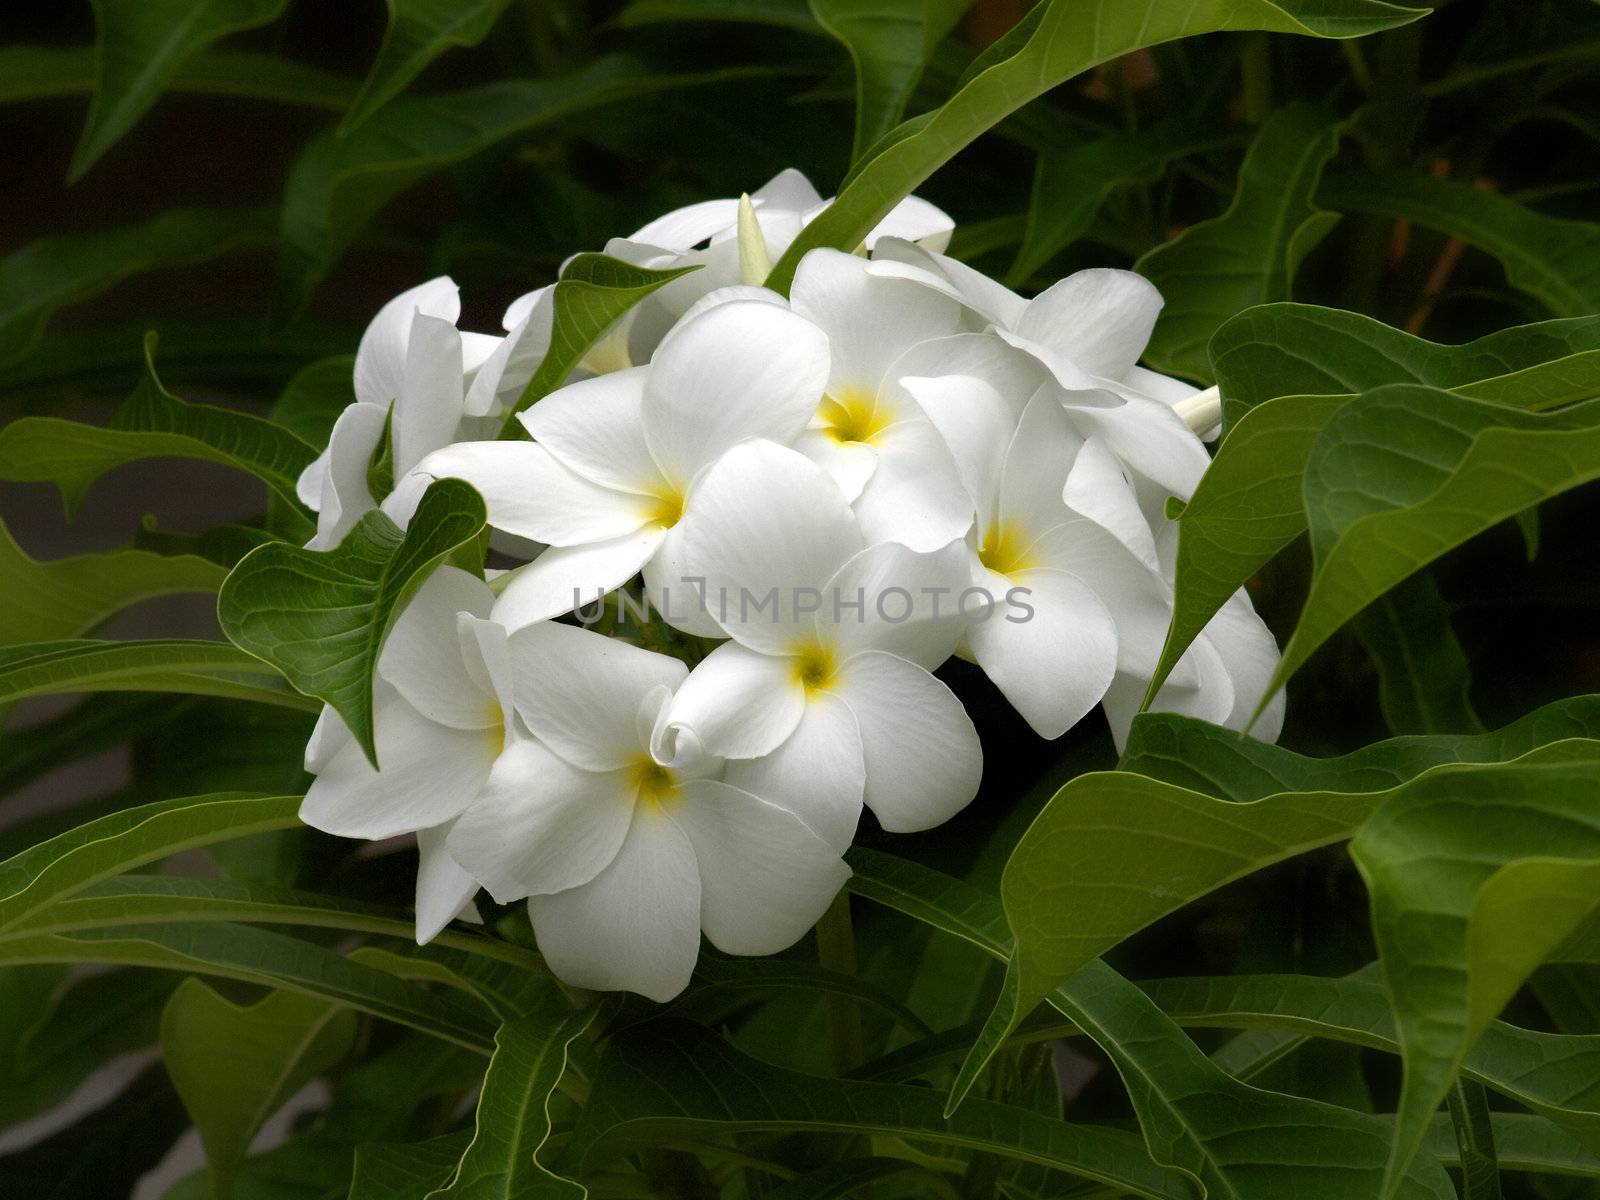 White Frangipanis or plumeria in natural environment on leaves background